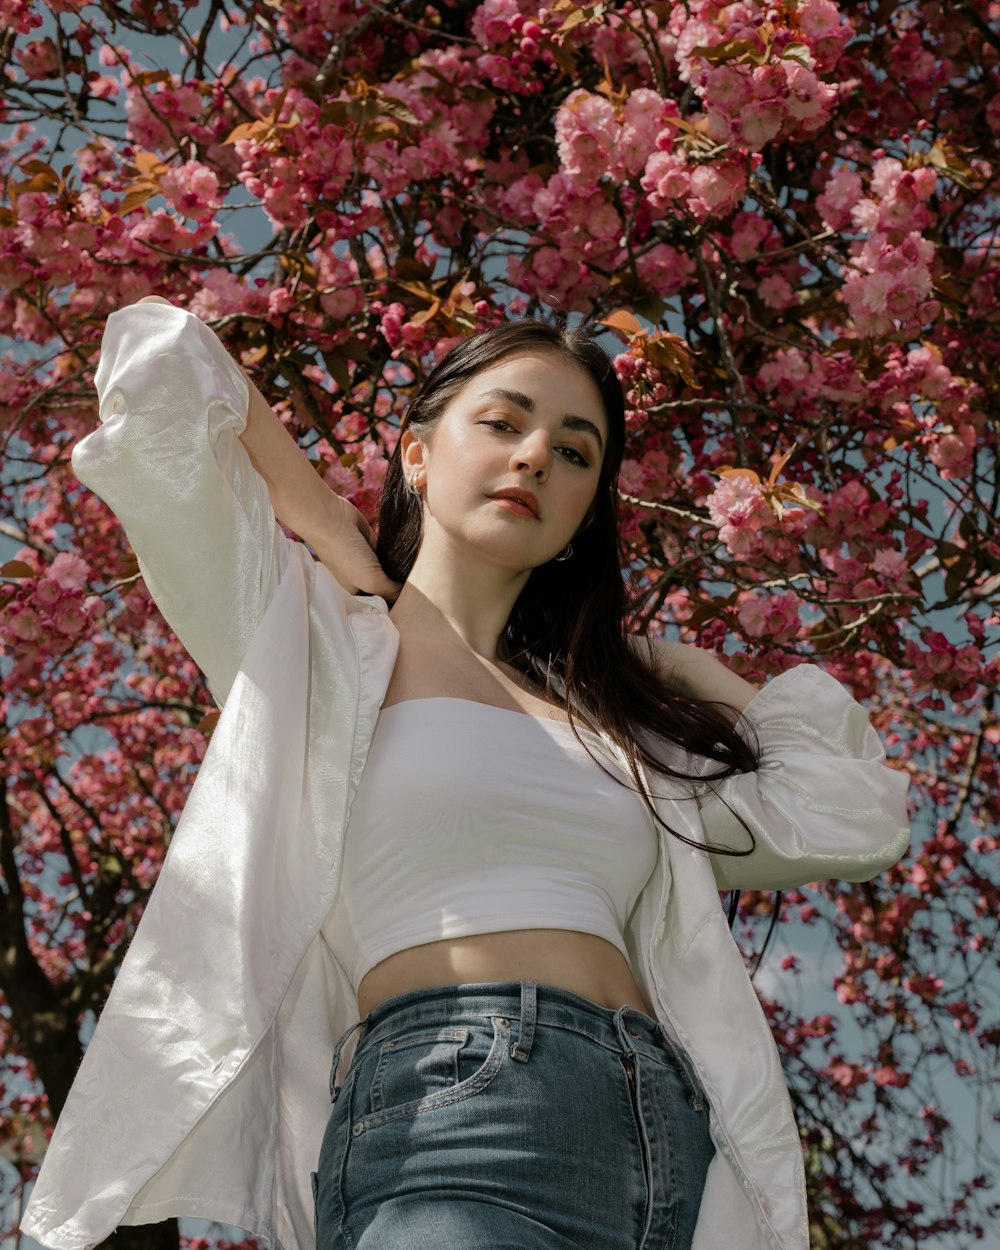 woman in white off shoulder shirt and blue denim jeans standing beside red flowers